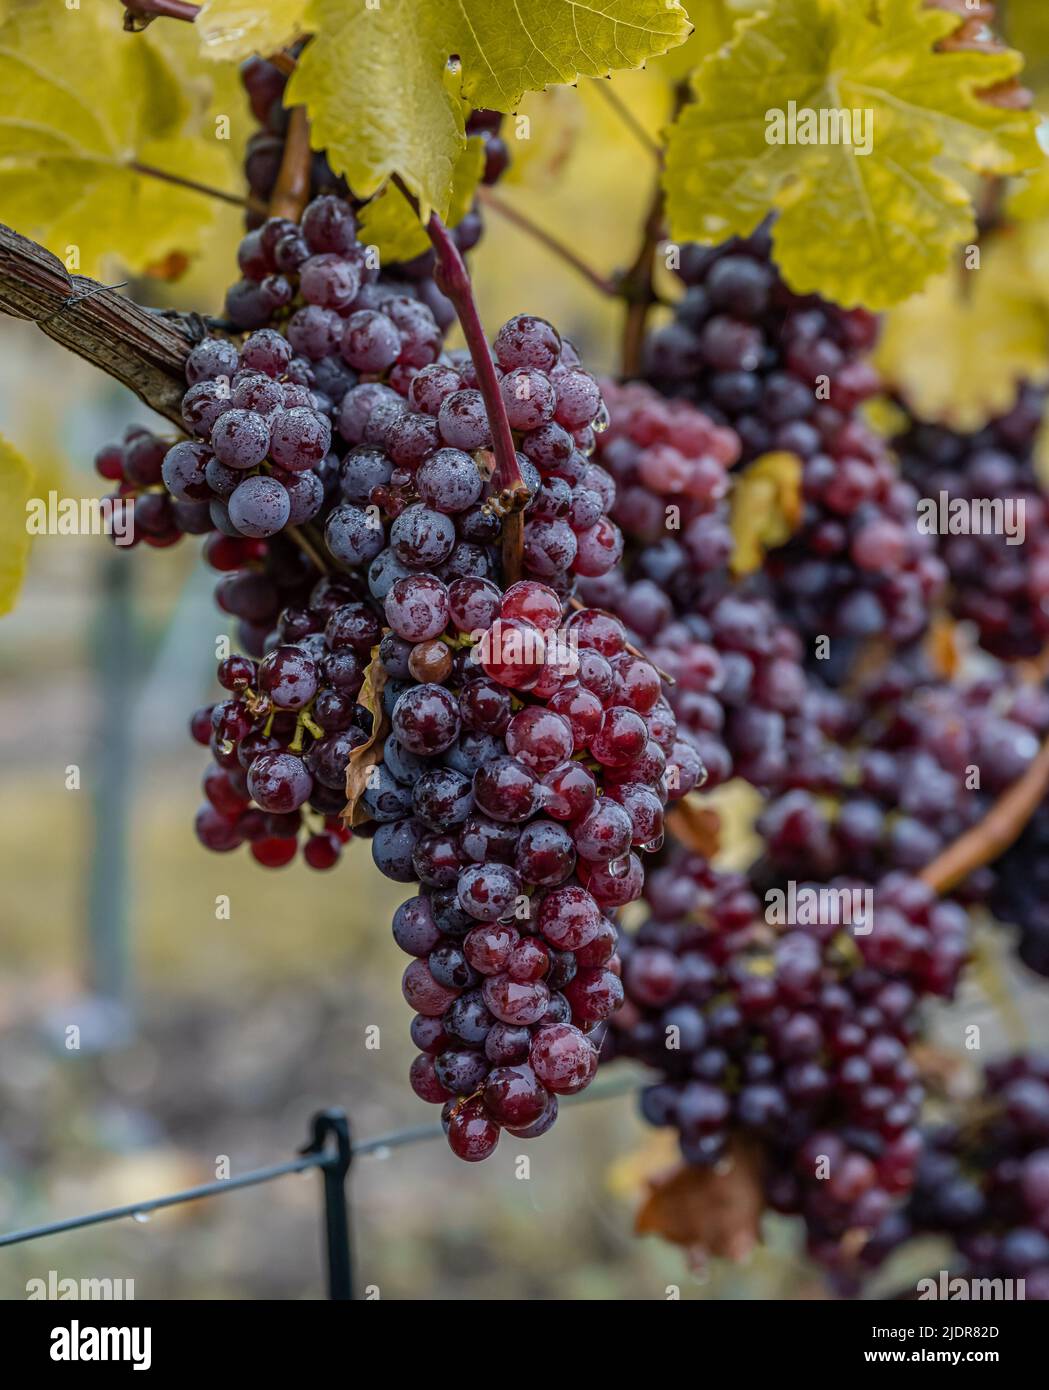 Red Wine grapes ready for harvest Region Moselle River Winningen Germany. Stock Photo